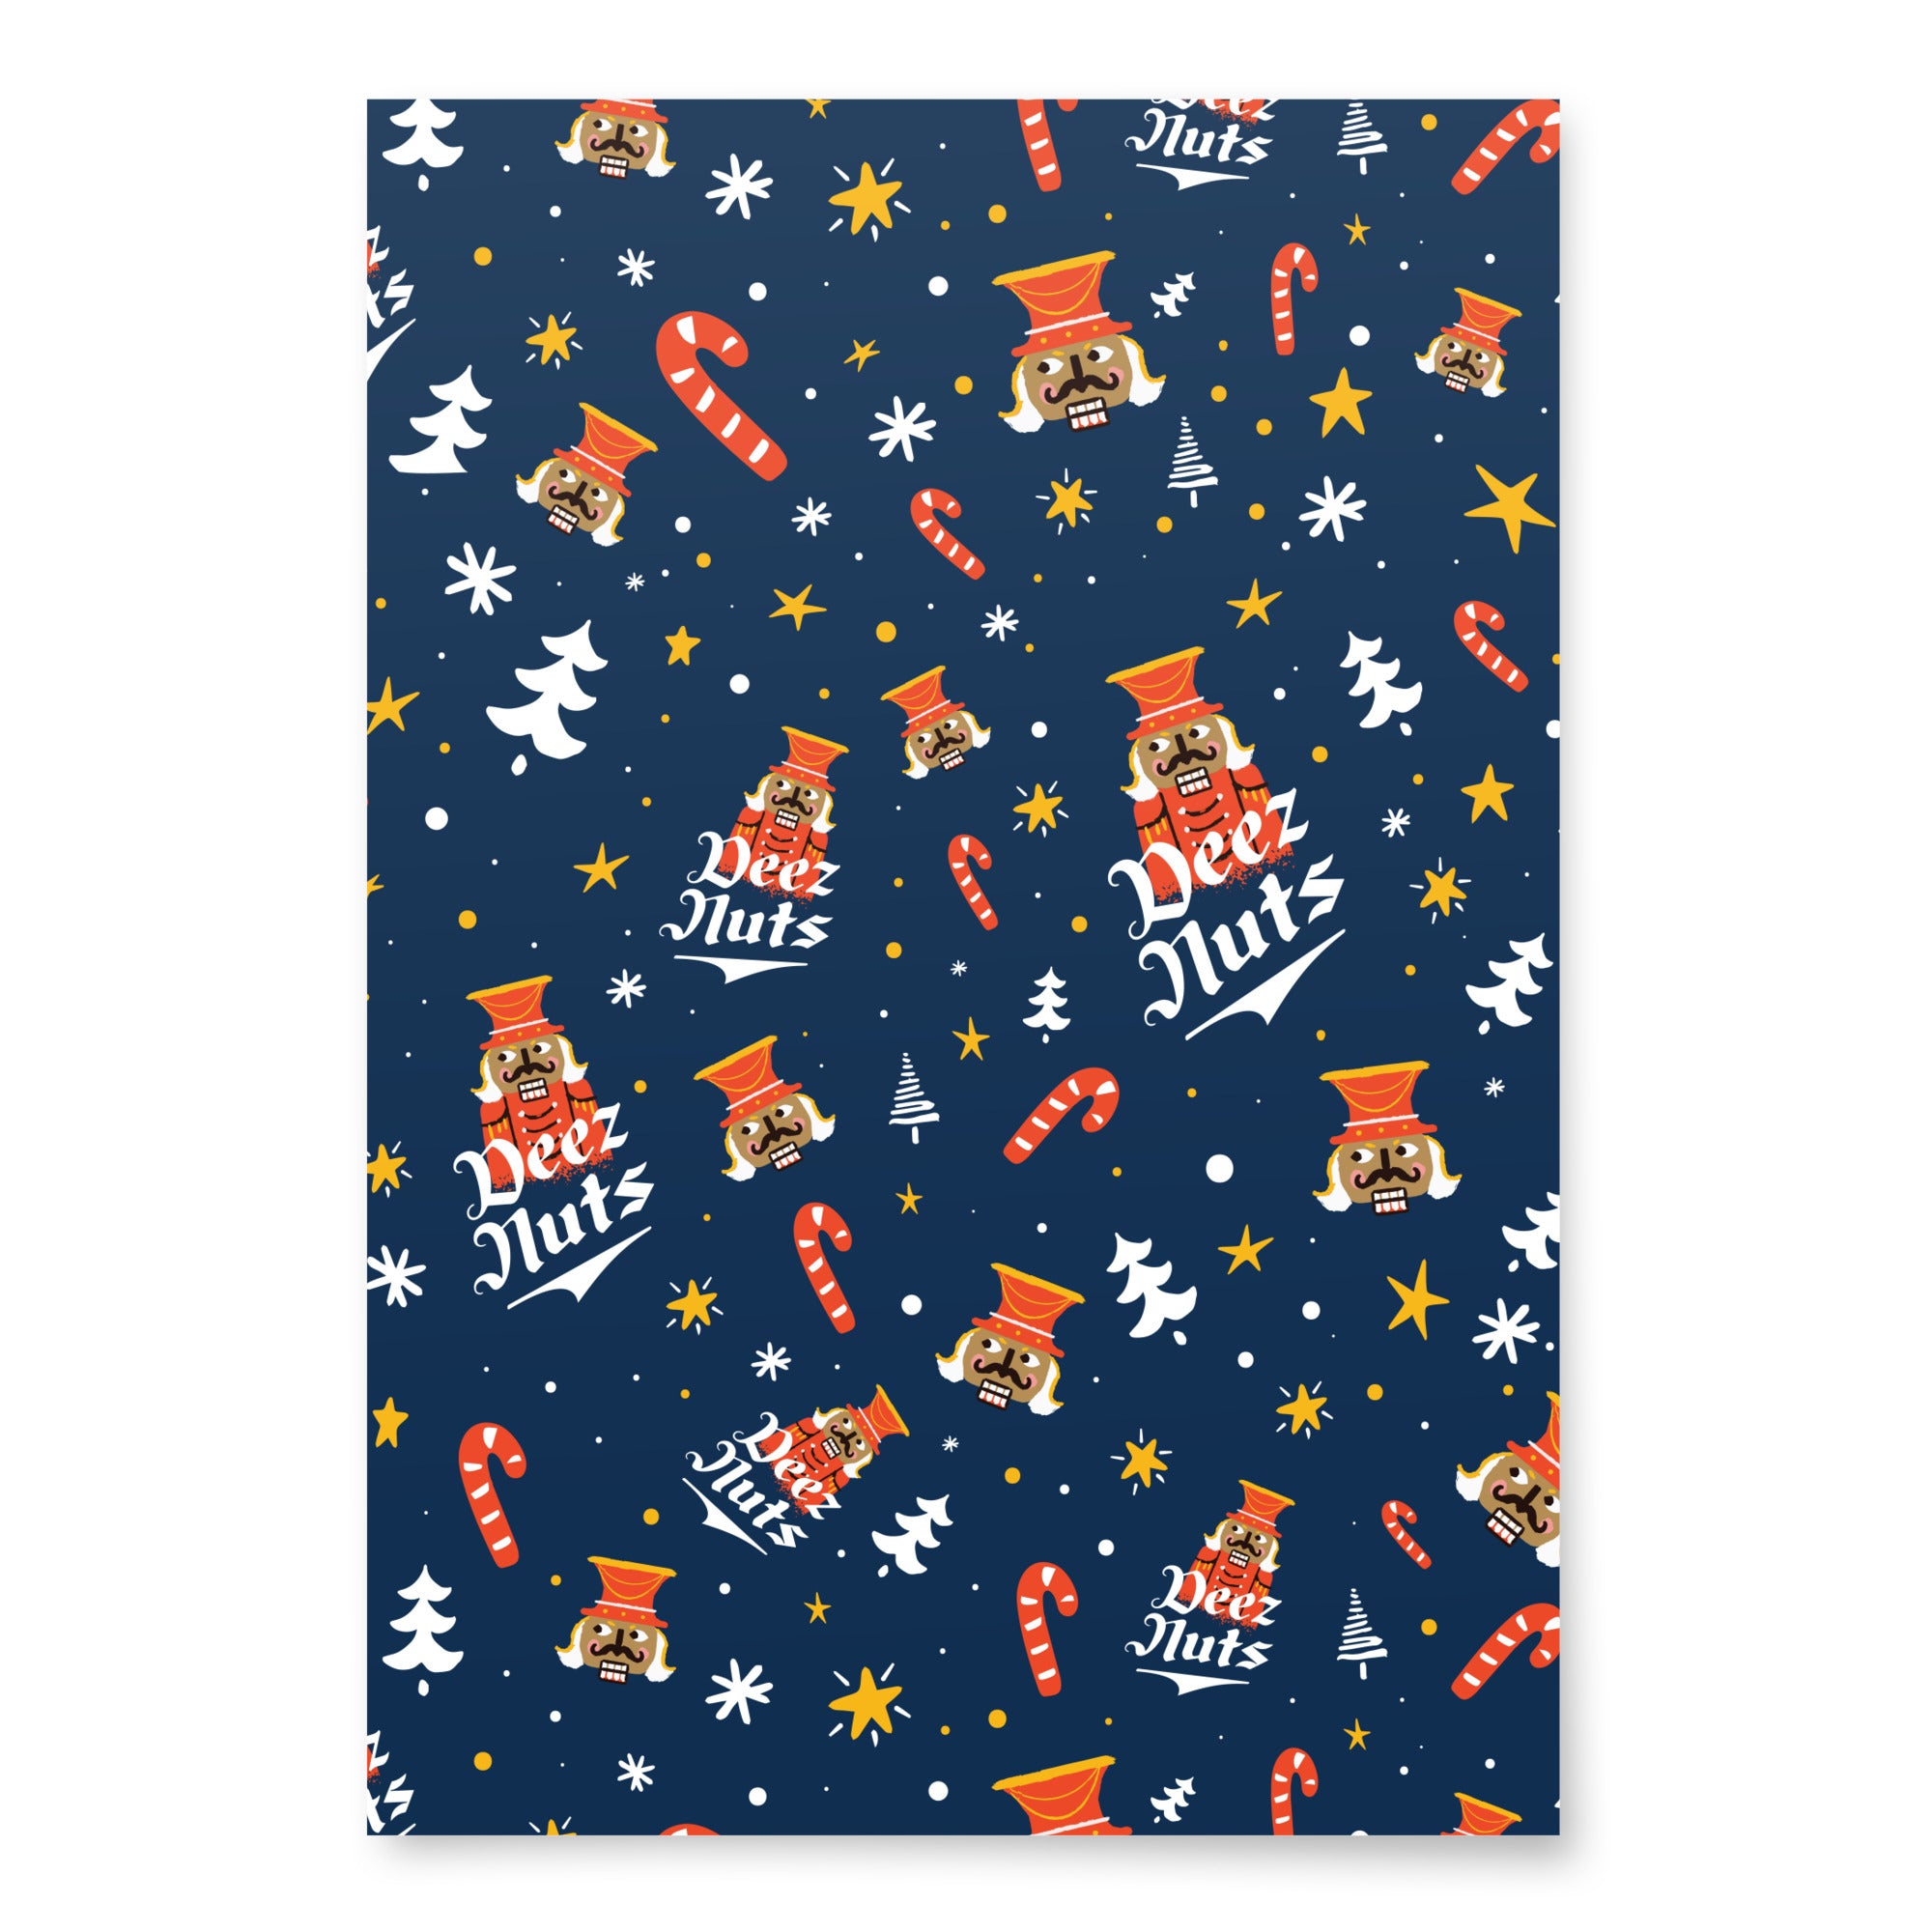 Deez Nuts Nutcracker - Wrapping Paper Sheets (3)